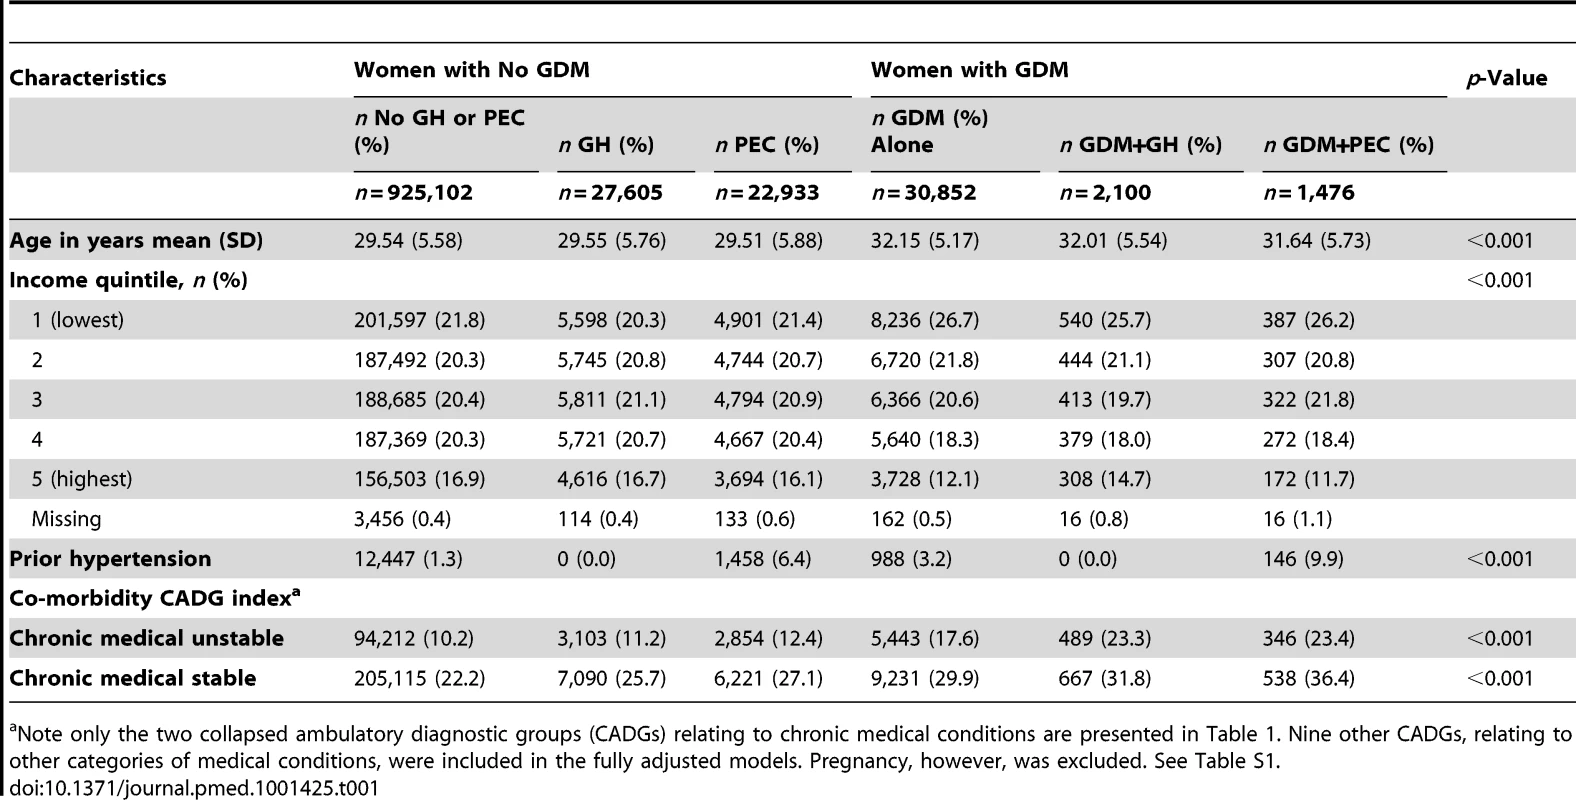 Demographic and clinical characteristics of women stratified by gestational diabetes diagnosis.